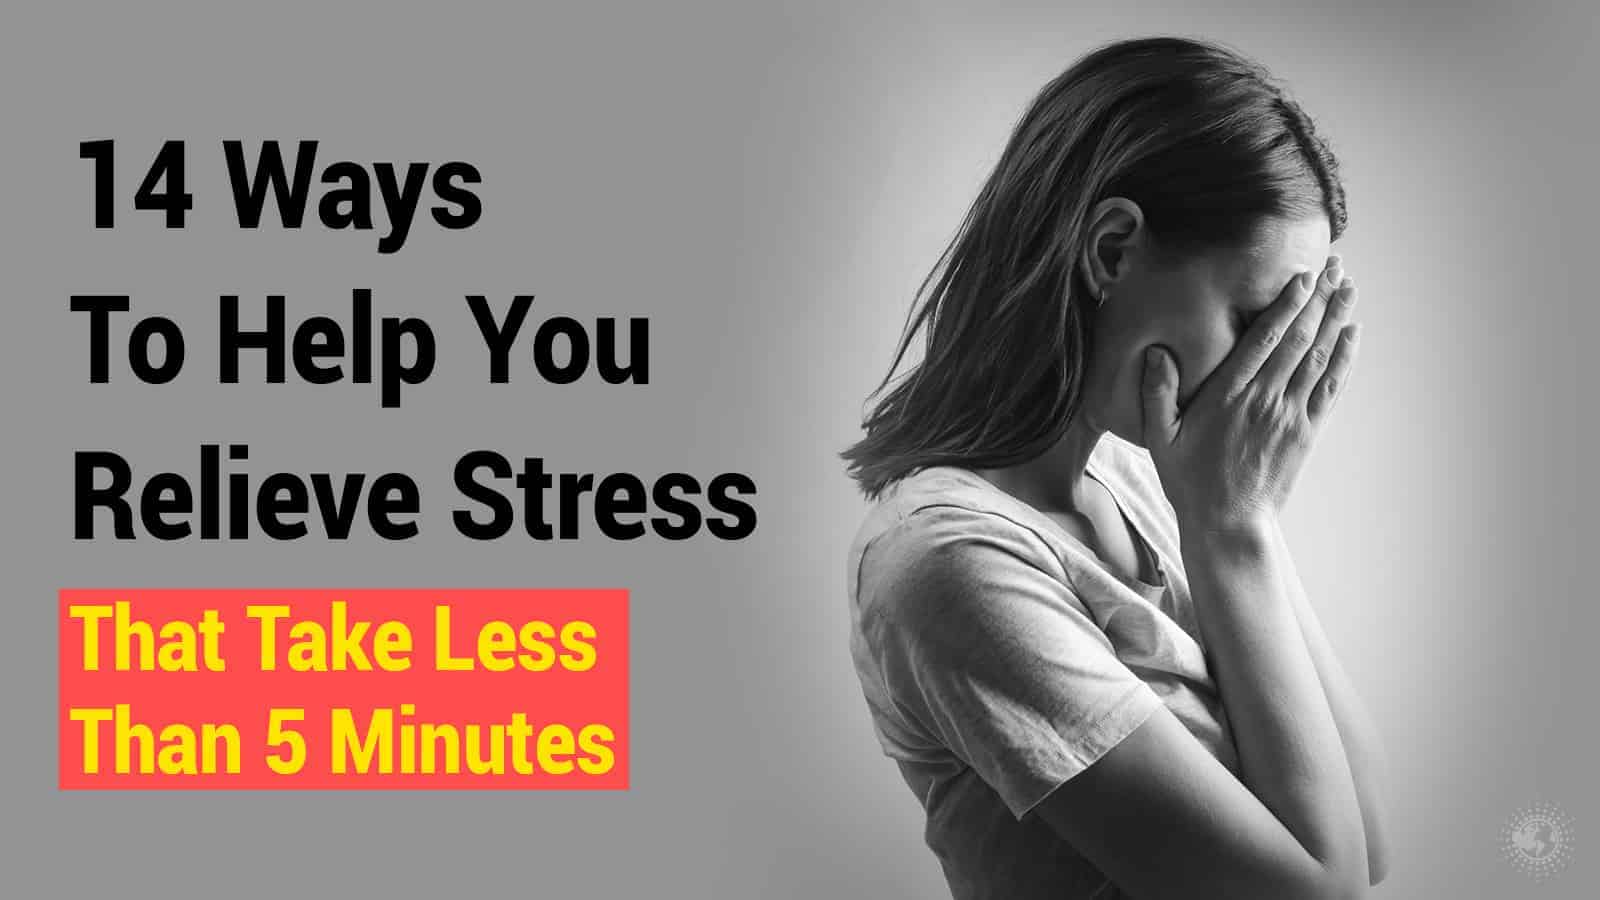 14 Ways To Help You Relieve Stress (That Take Less Than 5 Minutes)